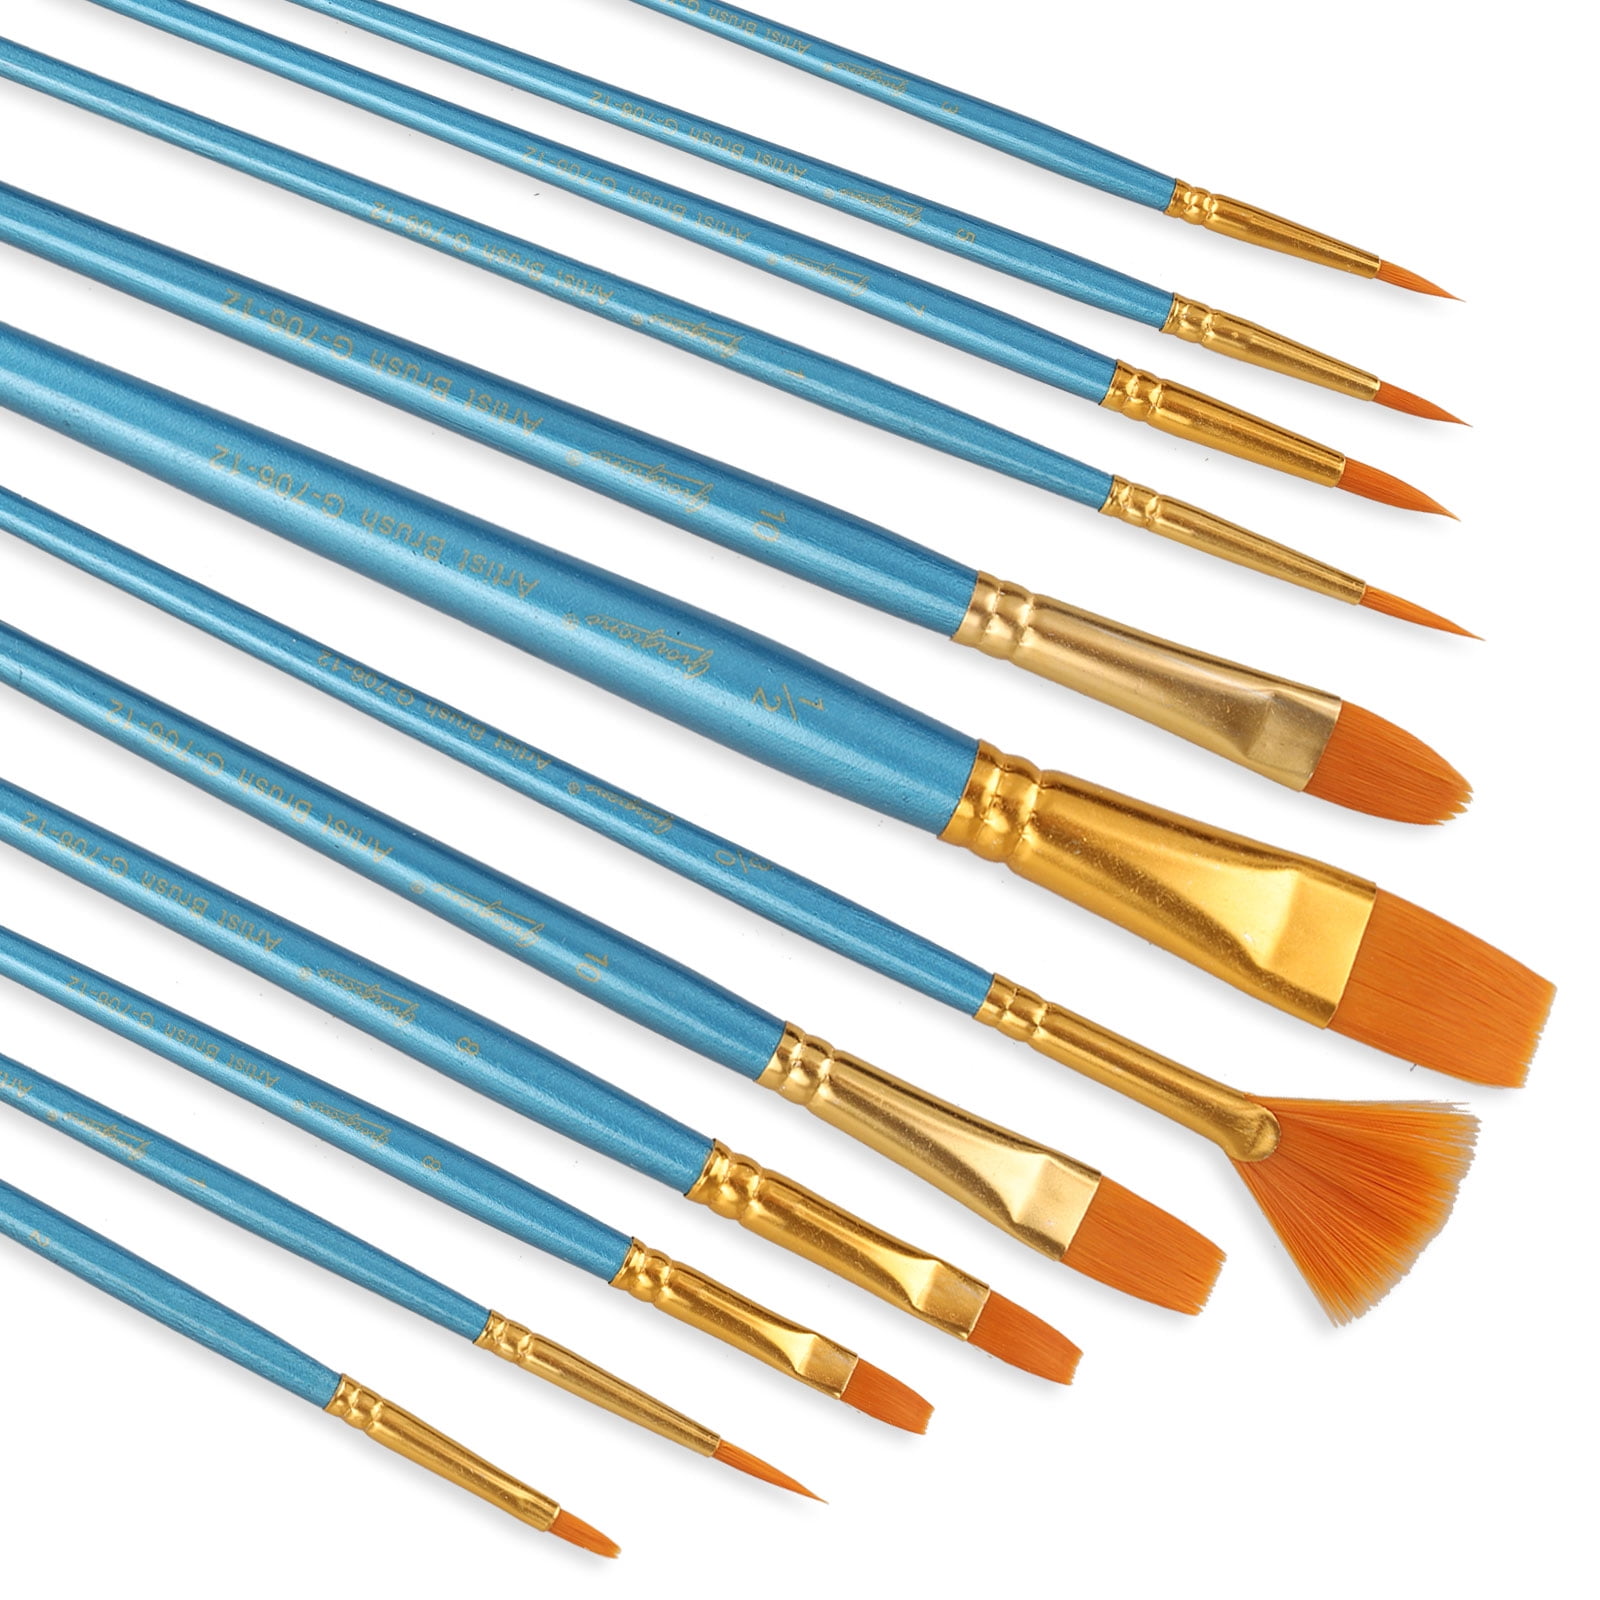 Artskills Premium Artists Paint Brush Set for Watercolor, Oil and Acrylic, for Fine Details and Wide Strokes, 24ct